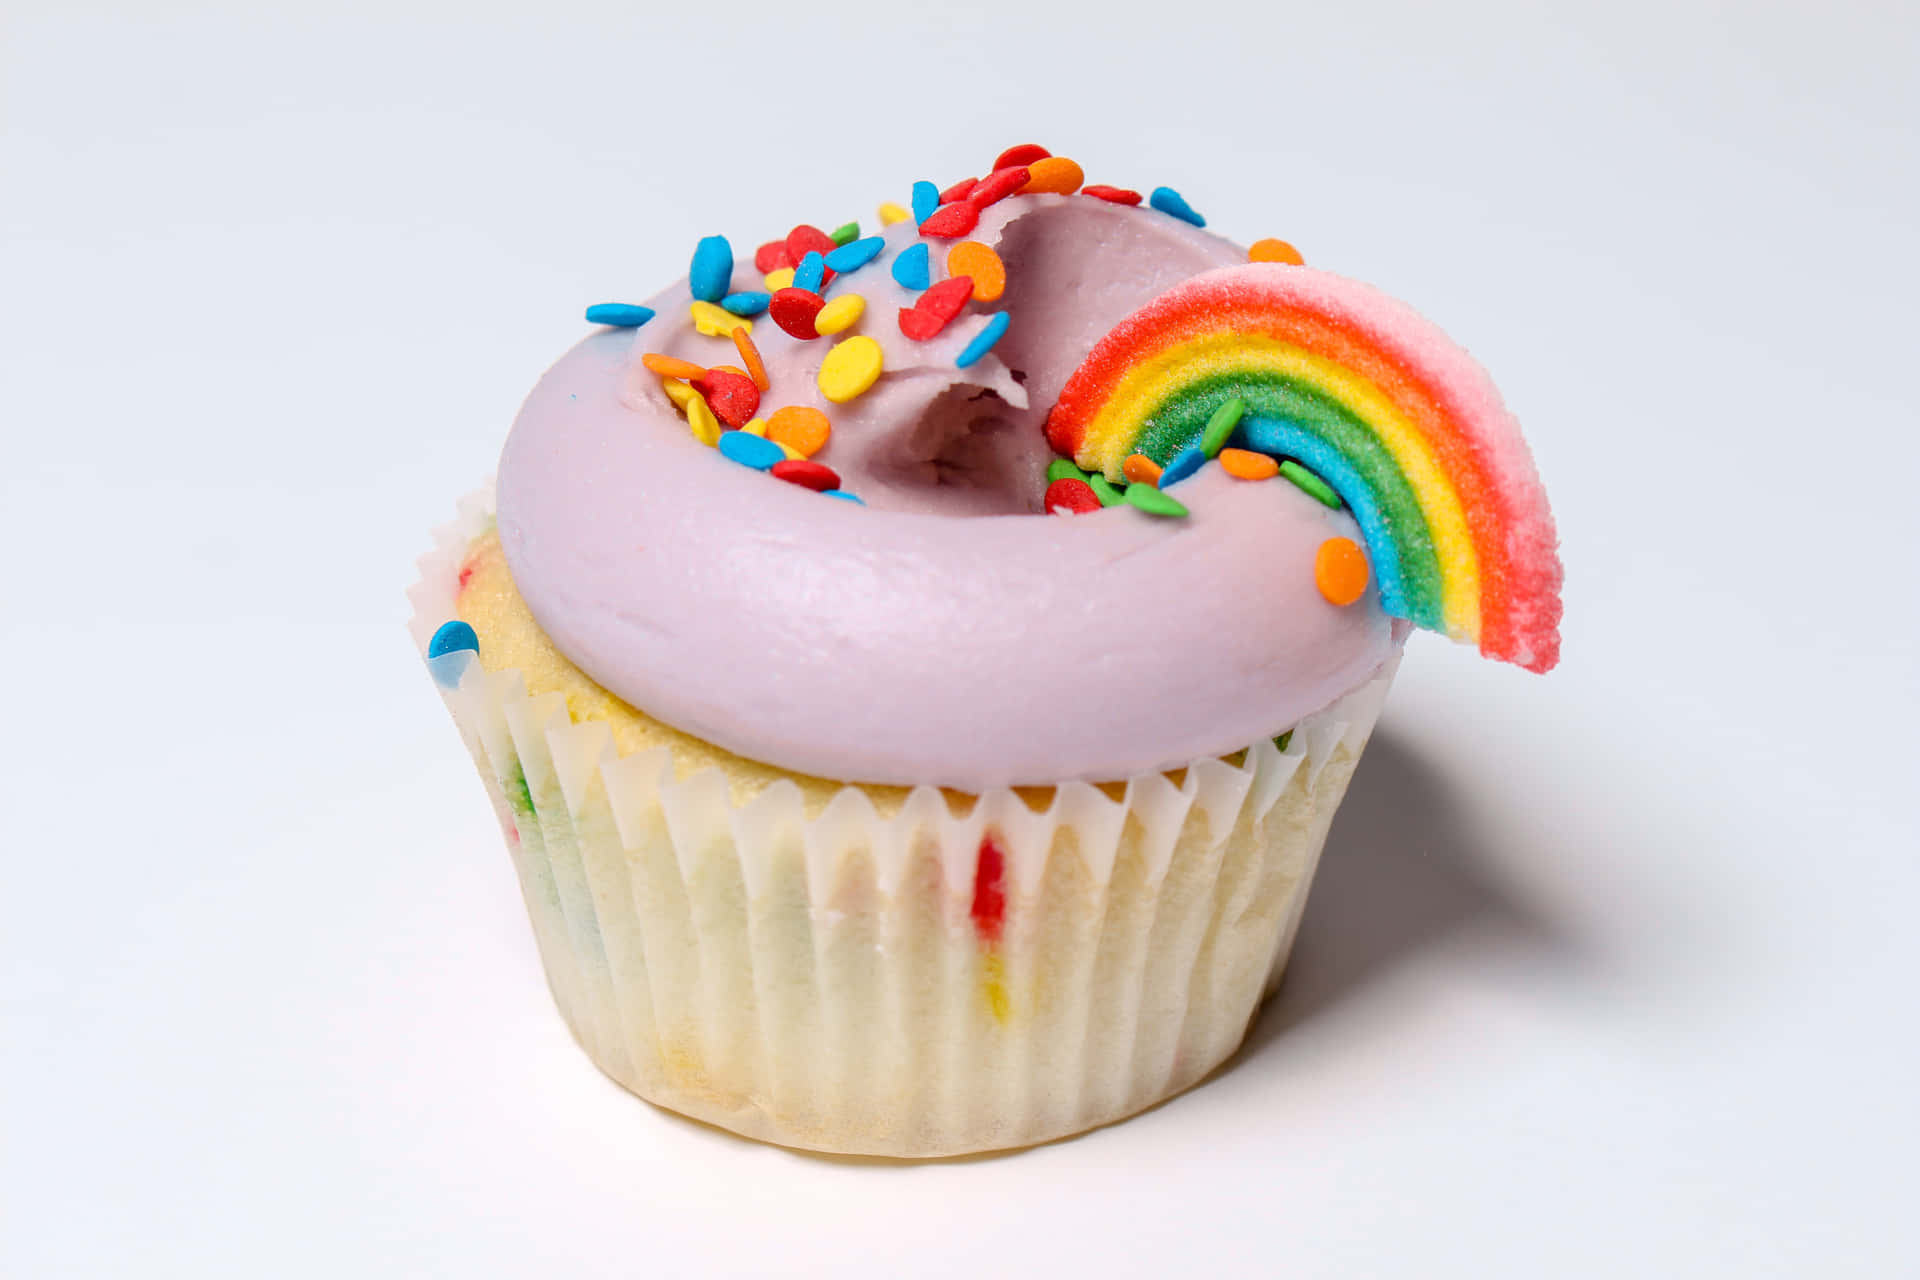 A sugary-sweet cupcake with pink frosting, sprinkled with sprinkles.